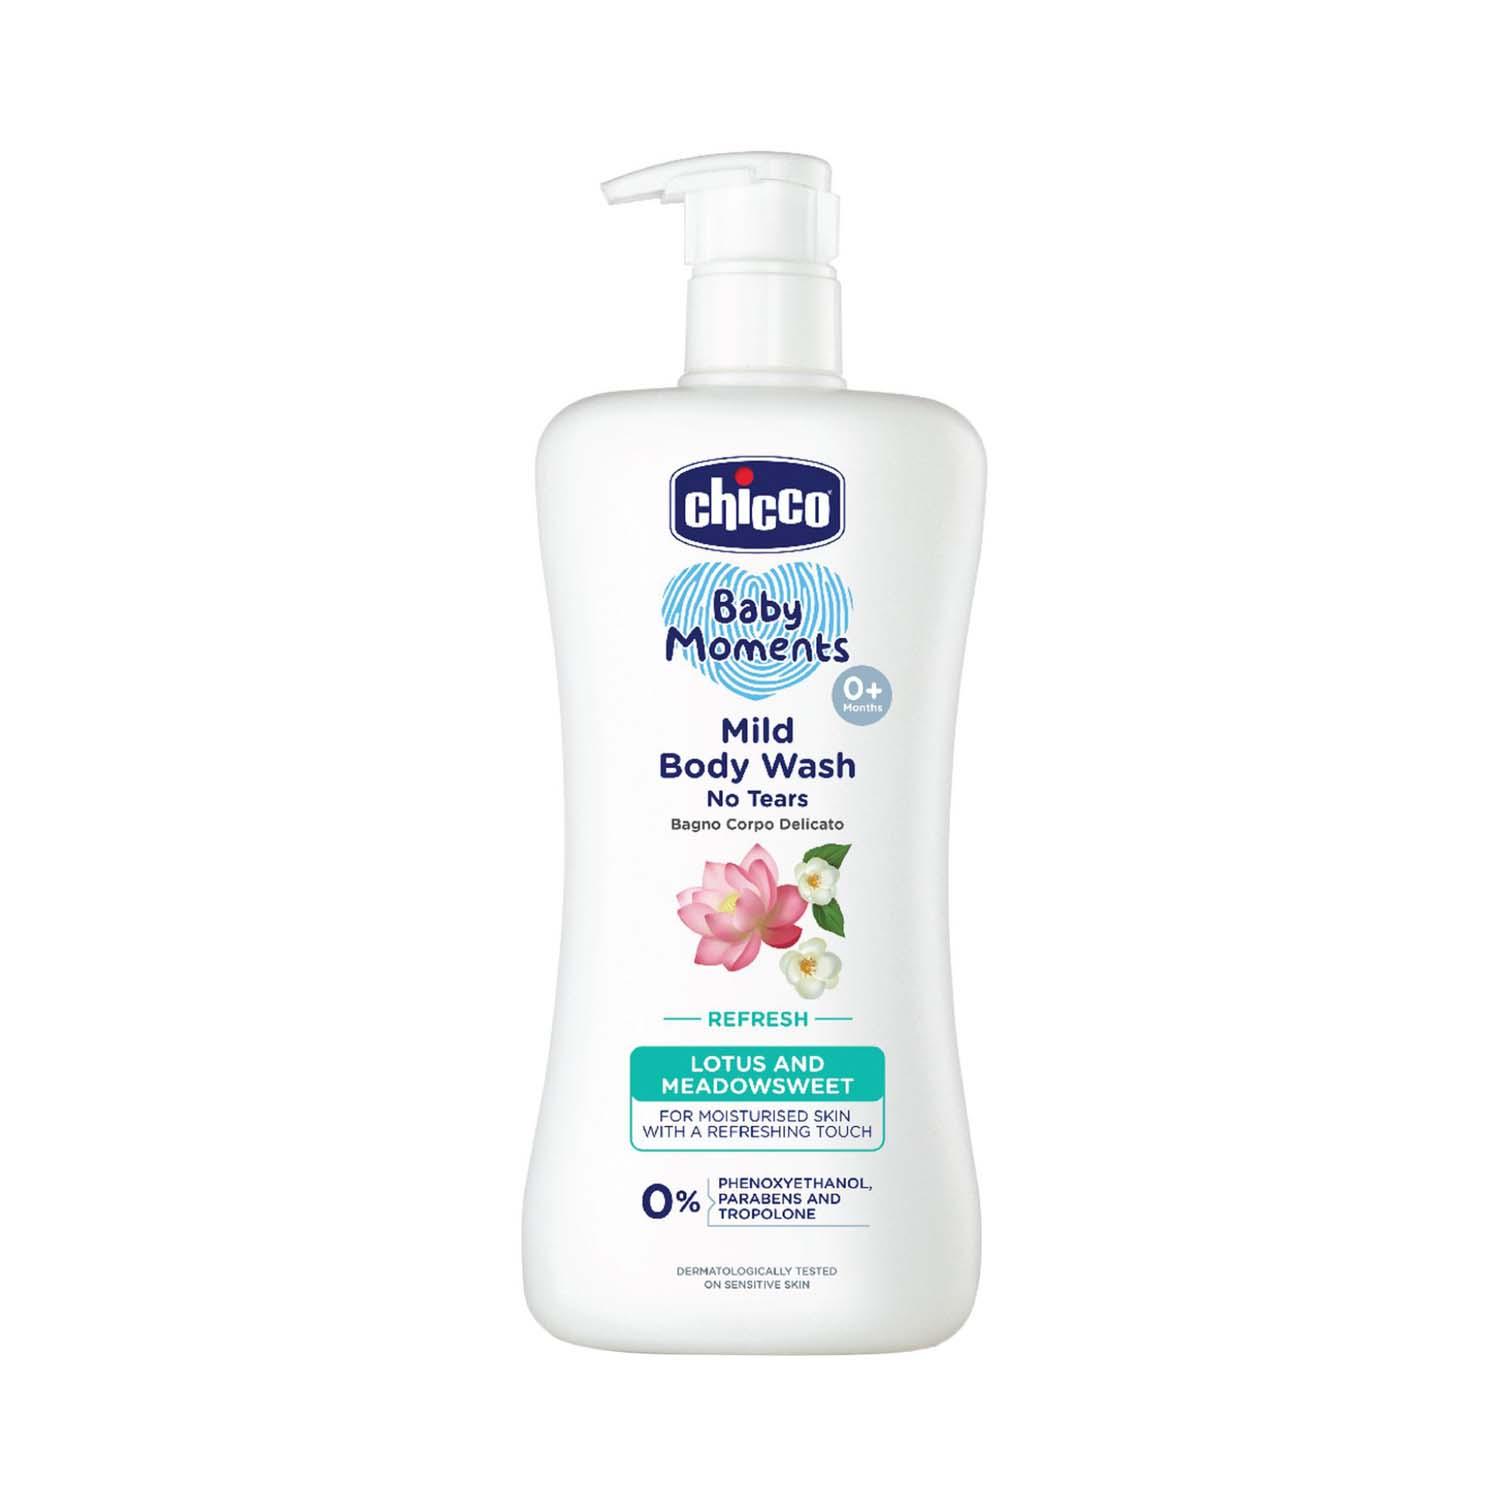 Chicco | Chicco Baby Moments Mild Body Wash Refresh (500 ml)